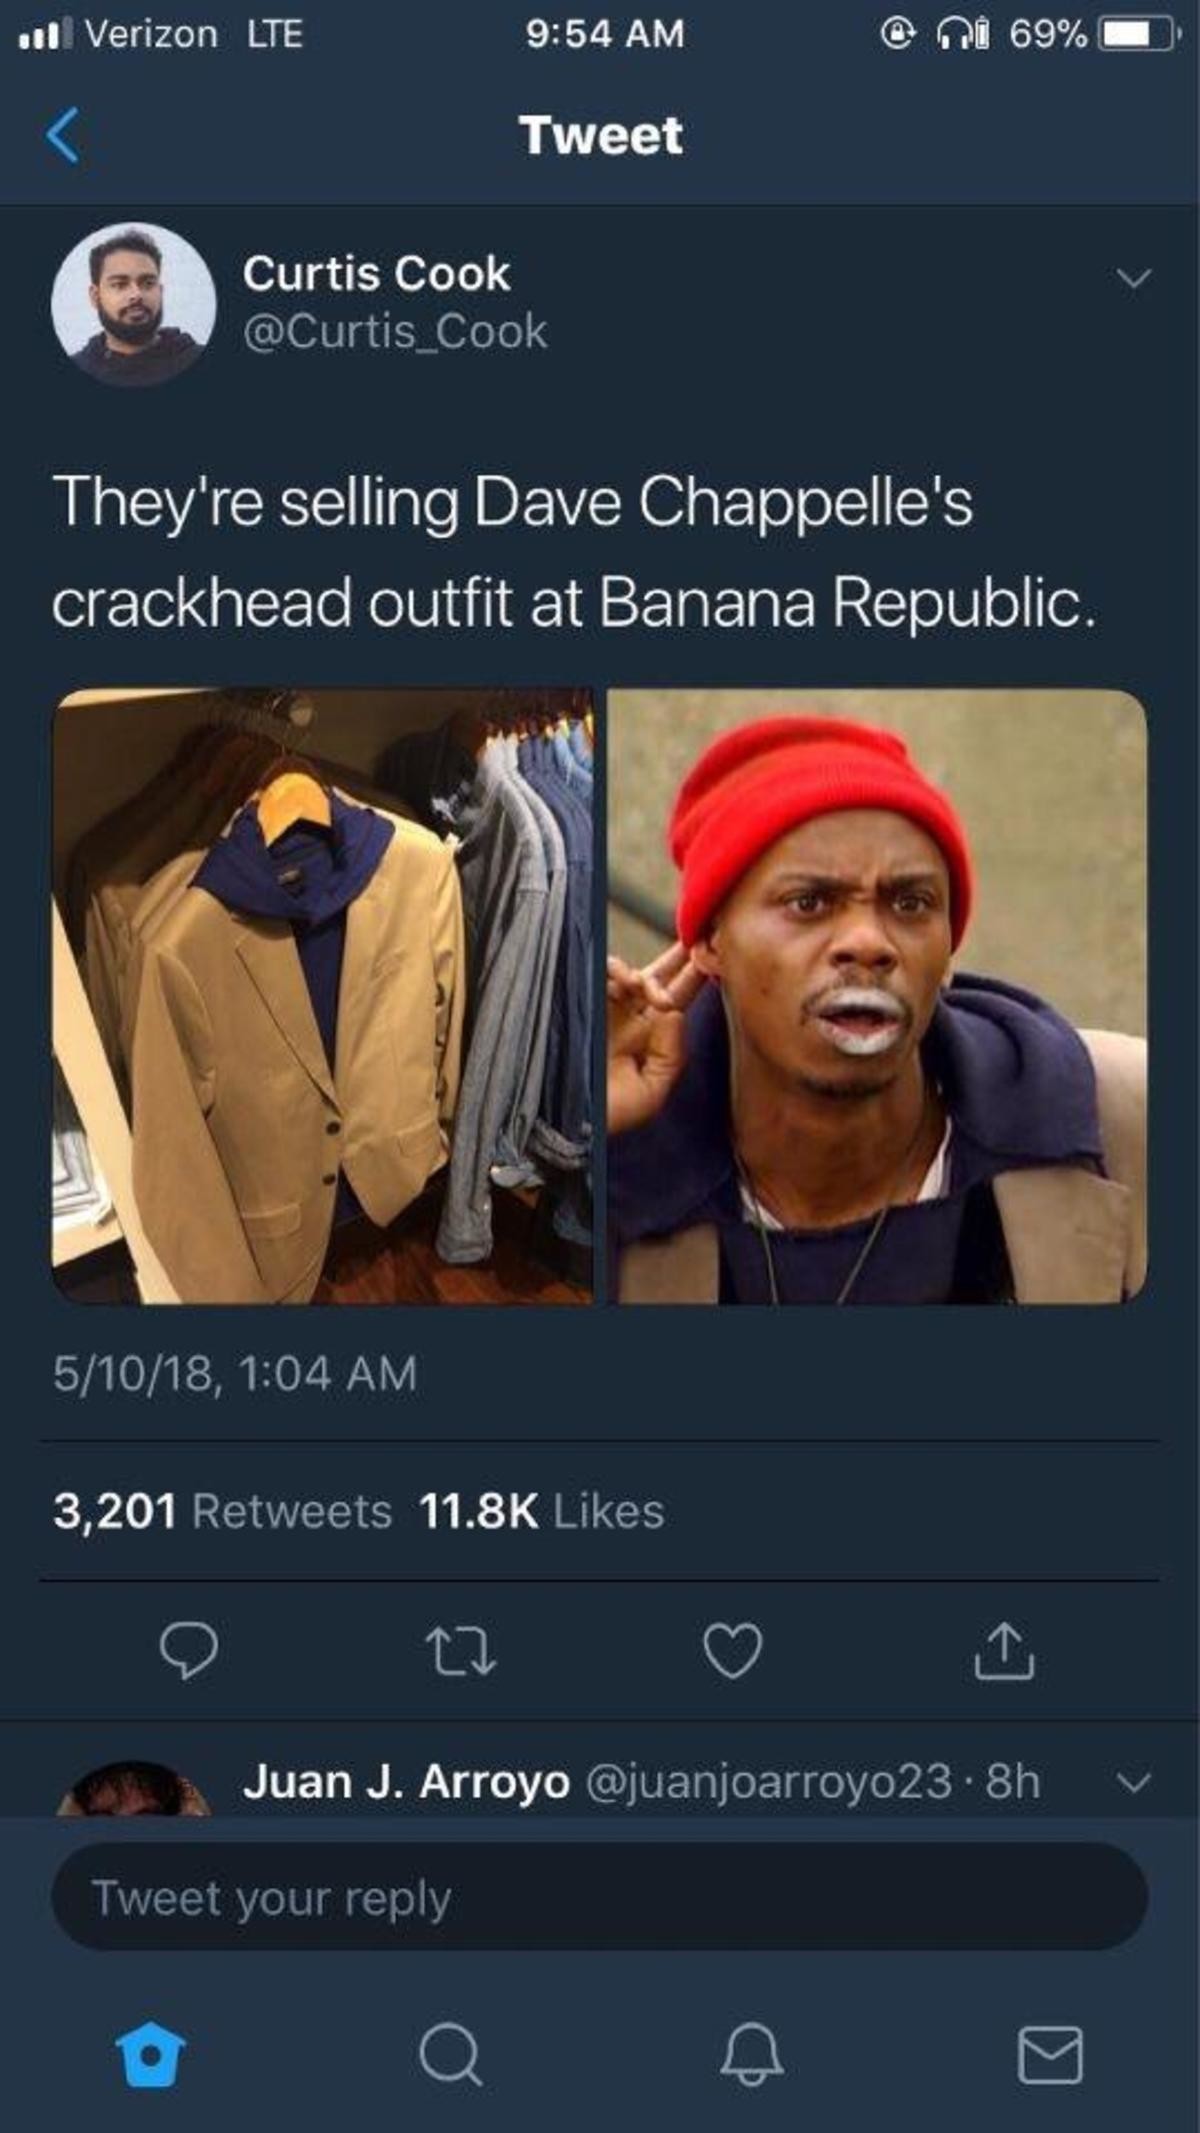 Tyrone Biggums. . u! Verizon HE 9254 AM (ii) " 69% iii t Tweet kiitti Curtis Cook if @Curtis Cook They' re selling Dave Chappelle' s crackhead outfit at Banana 